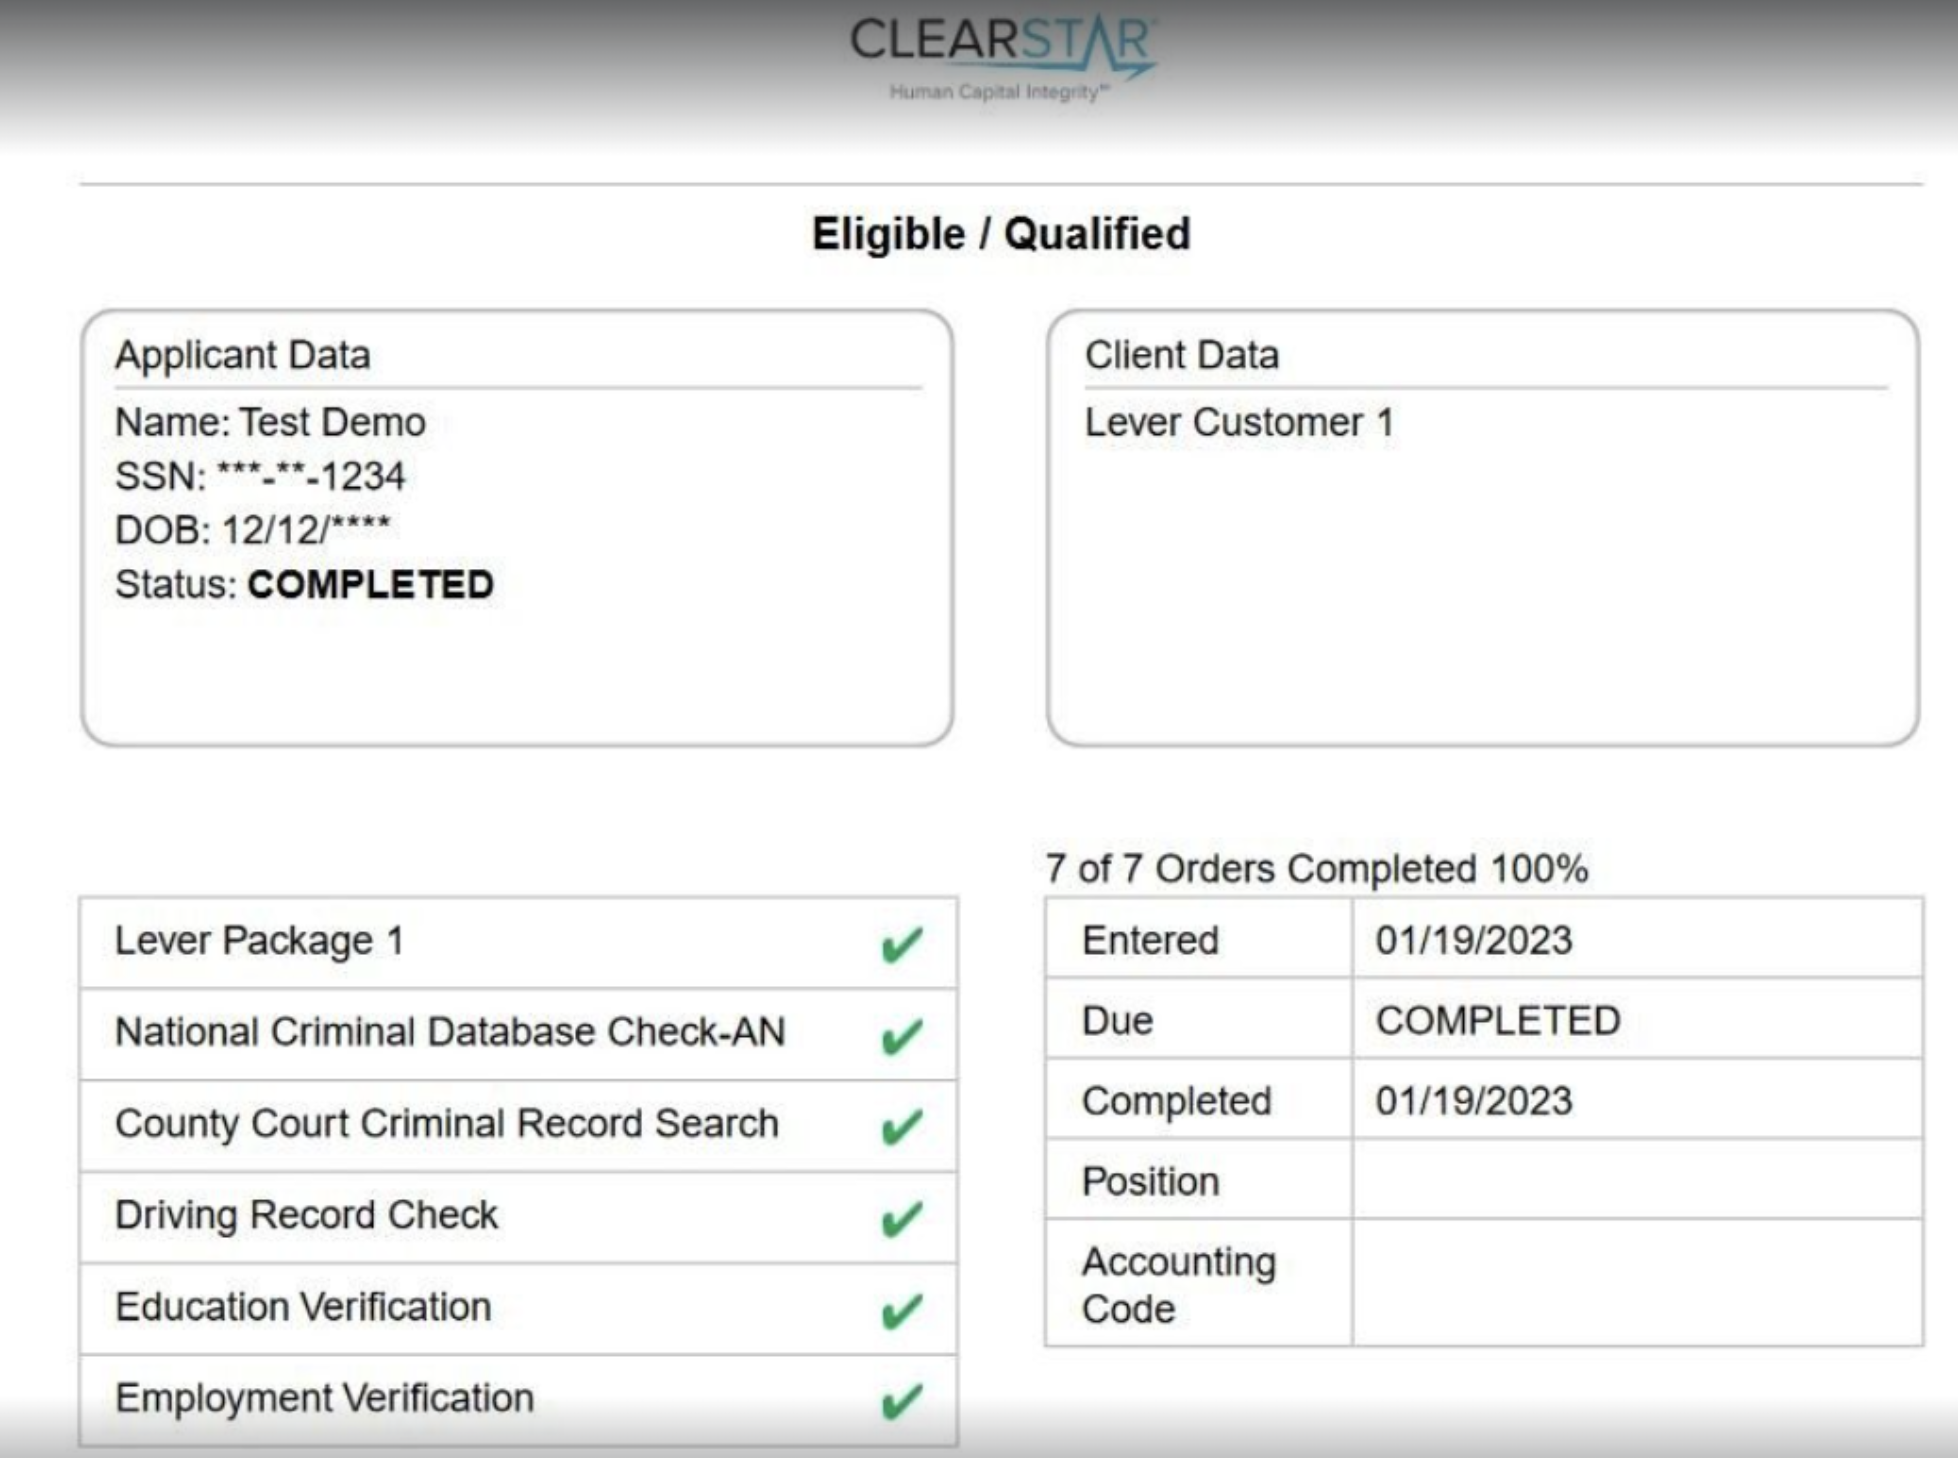 Example of a ClearStar report